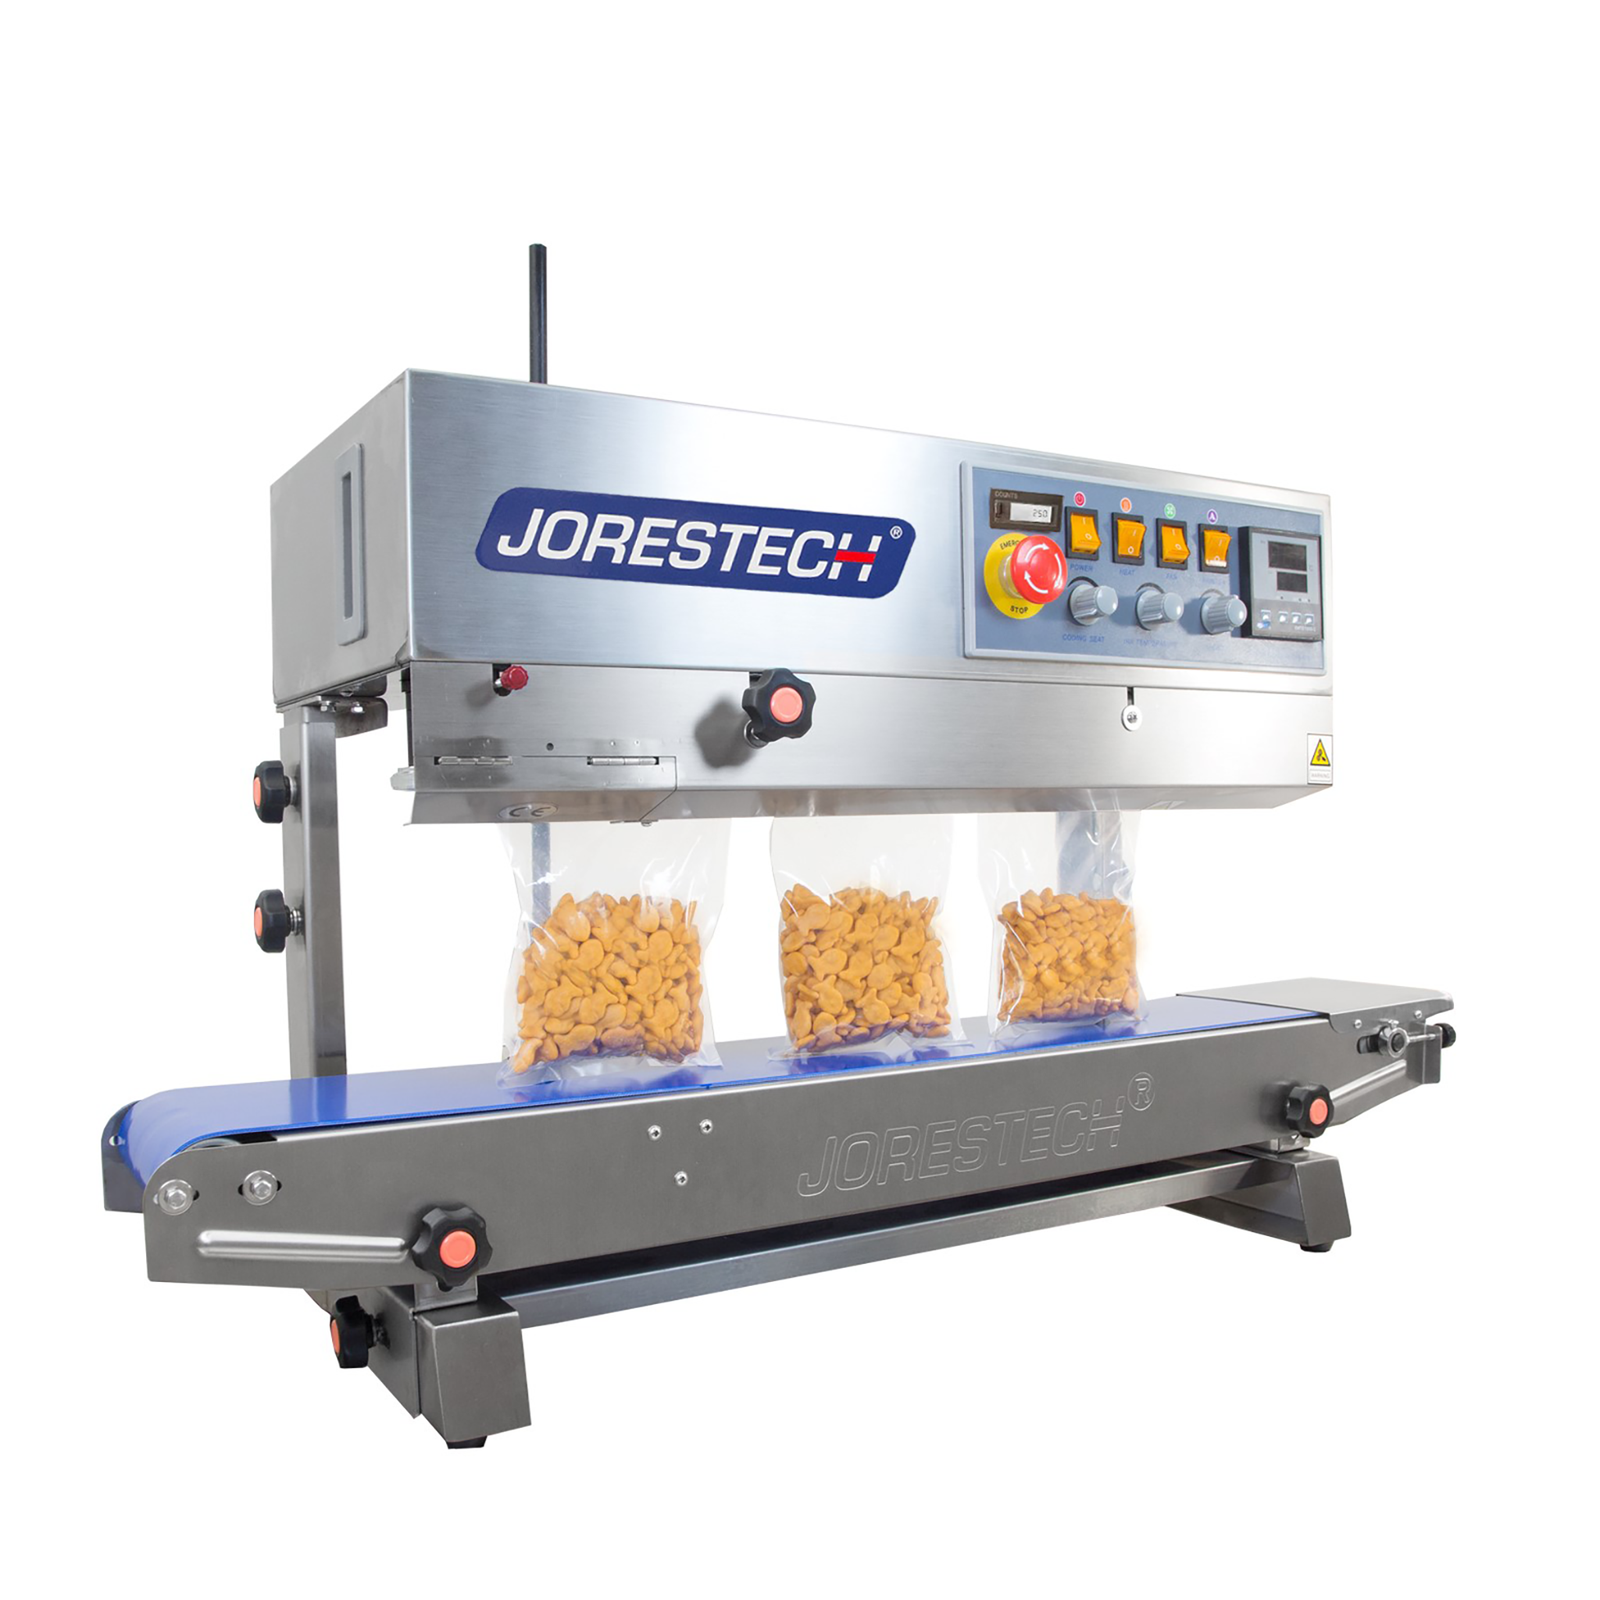 stainless steel JORESTECH continuous band sealer sealing several plastic bags filled with orange crackers